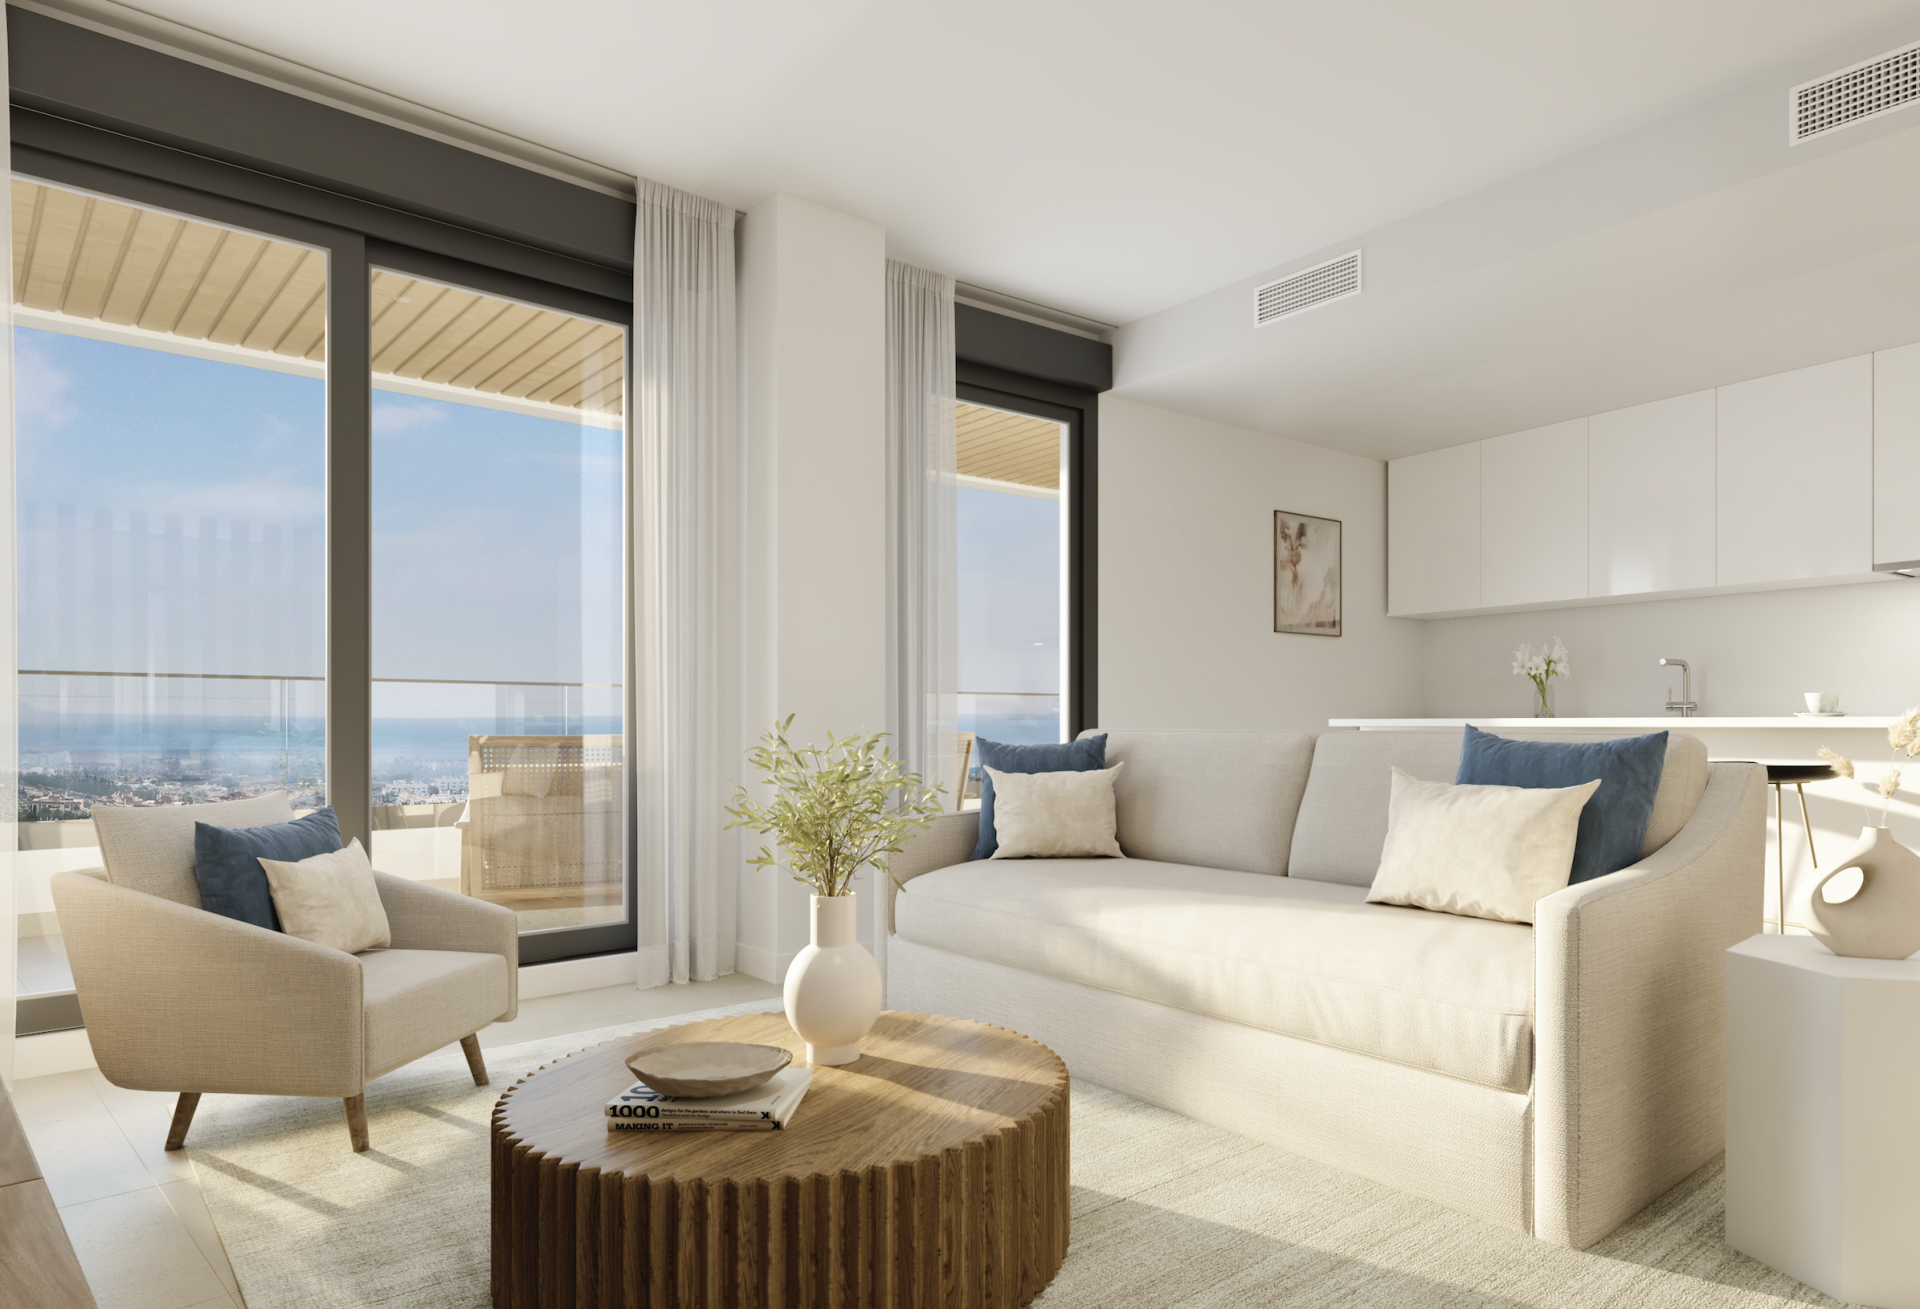 New complex under construction in an elevated position providing privileged views of the coastline and the sea